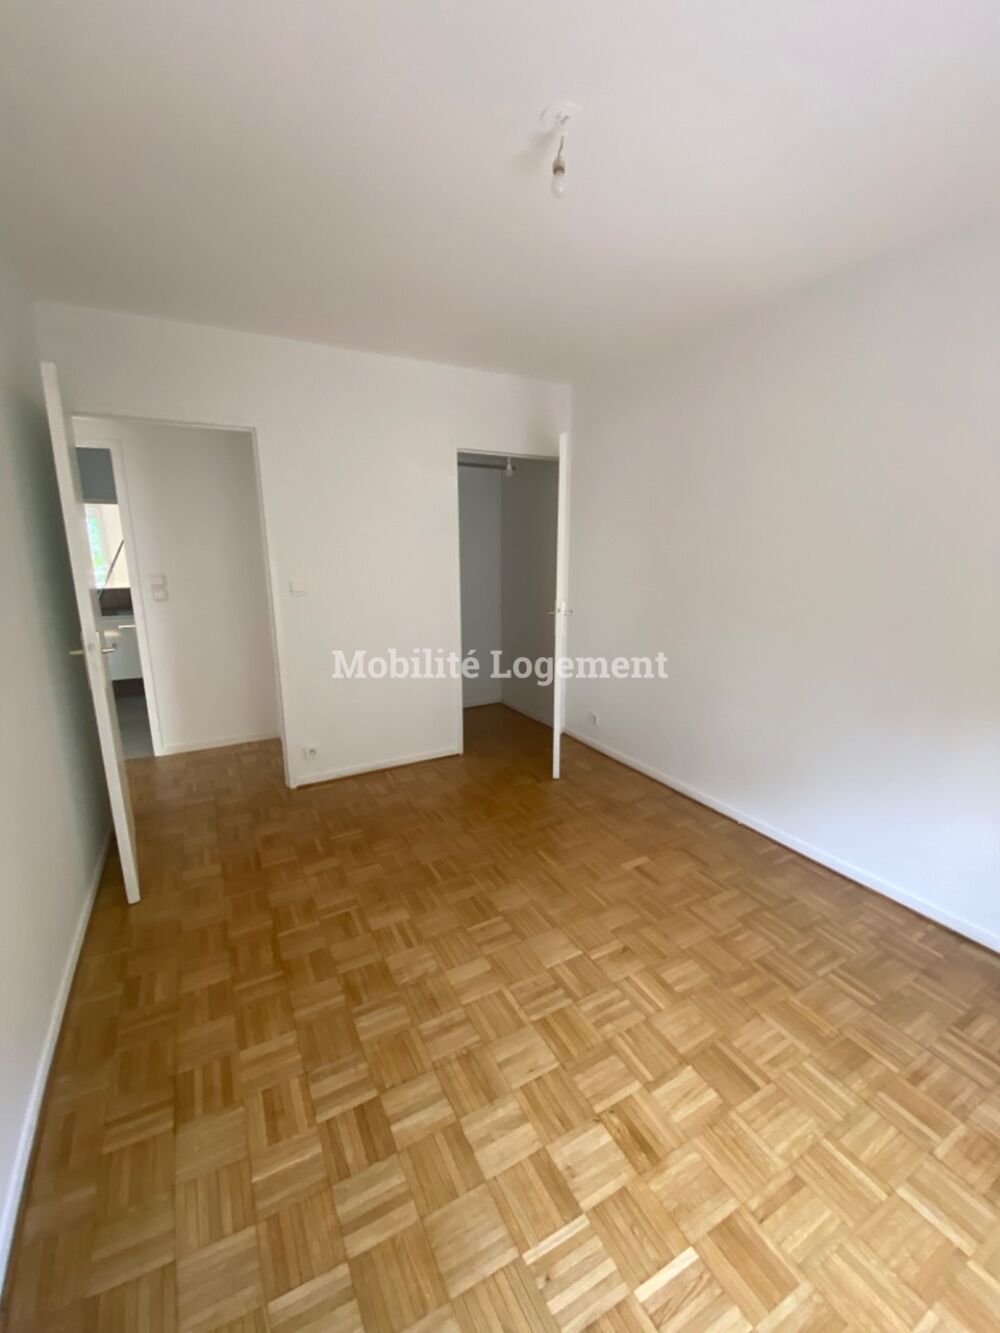 Bright 3-Bedroom Apartment for Rent in Villeurbanne with Parking Space